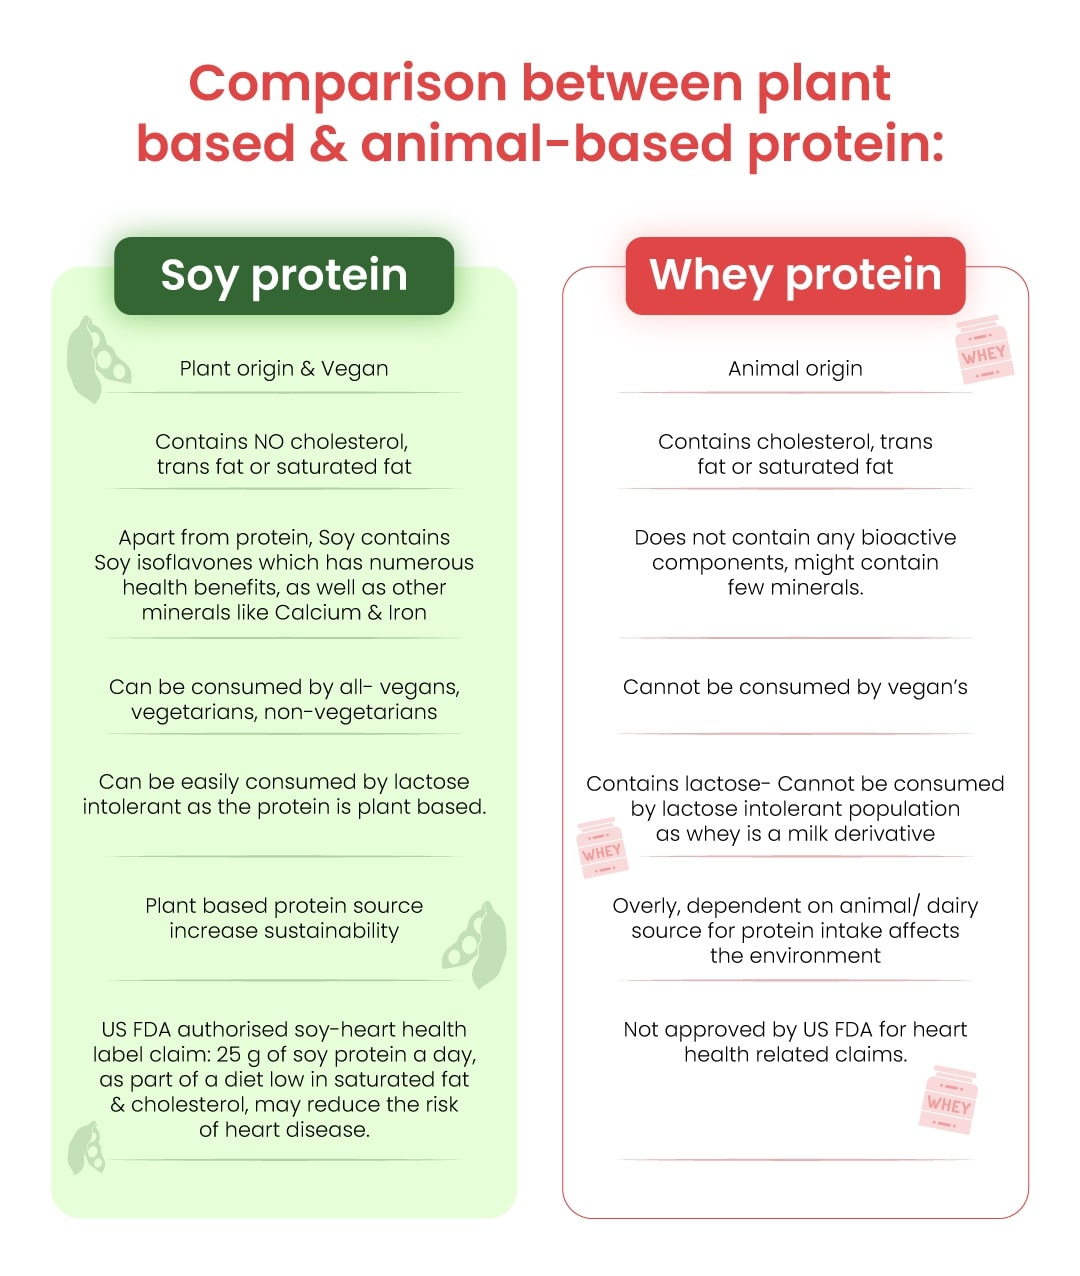 Comparison between Soy- A plant based protein & Whey- An animal based protein